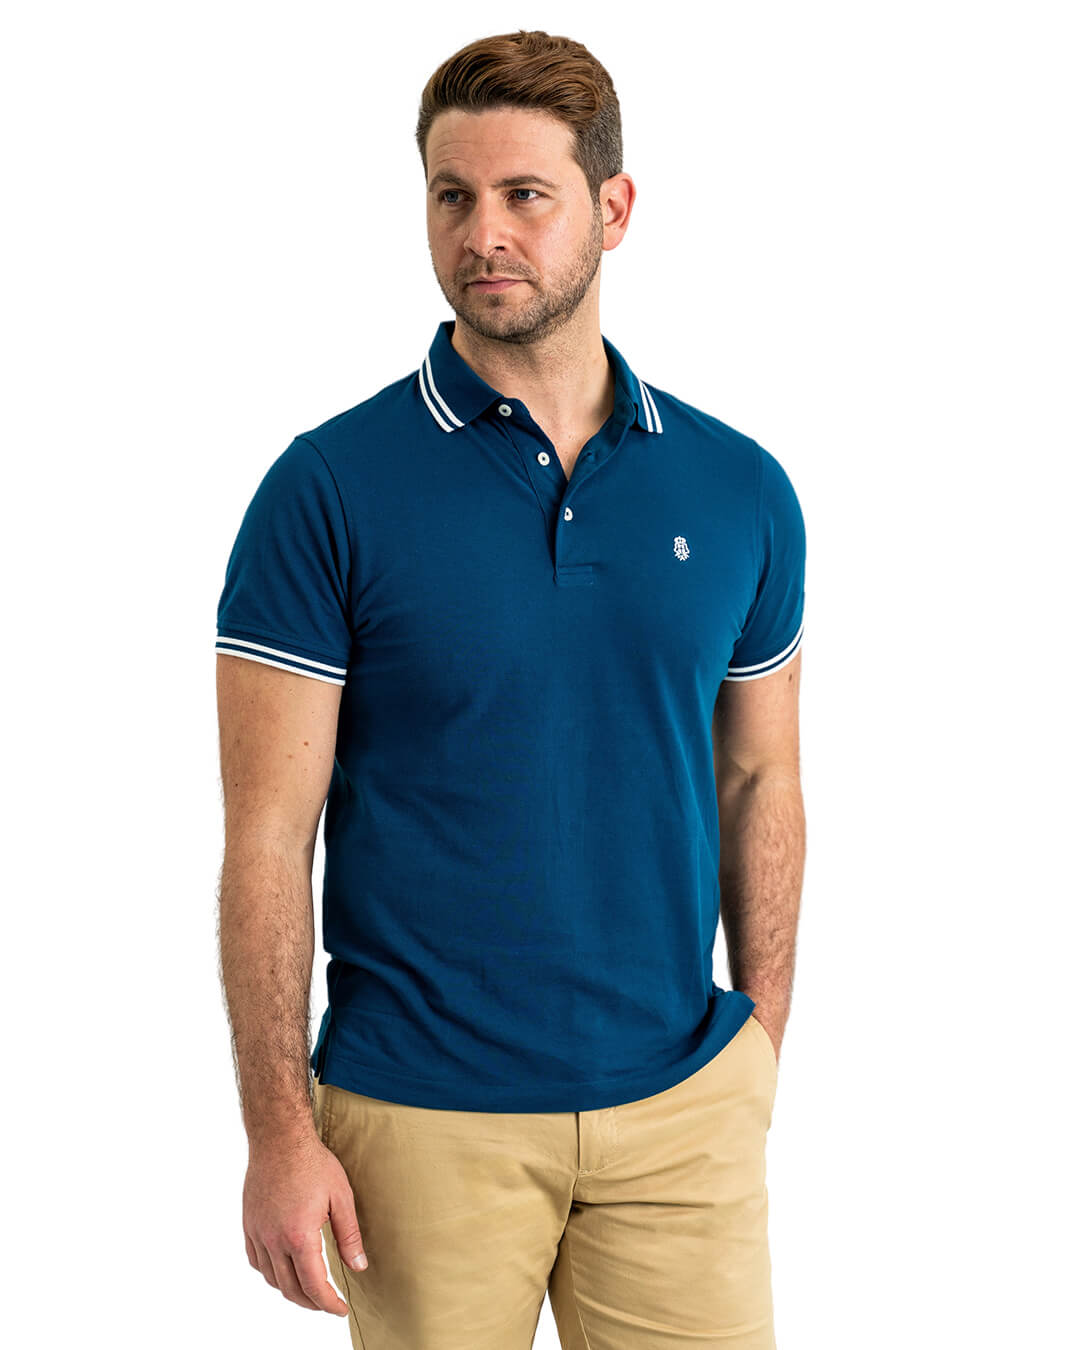 Navy Pique Polo Shirt With Double Tipped Collar & Cuff